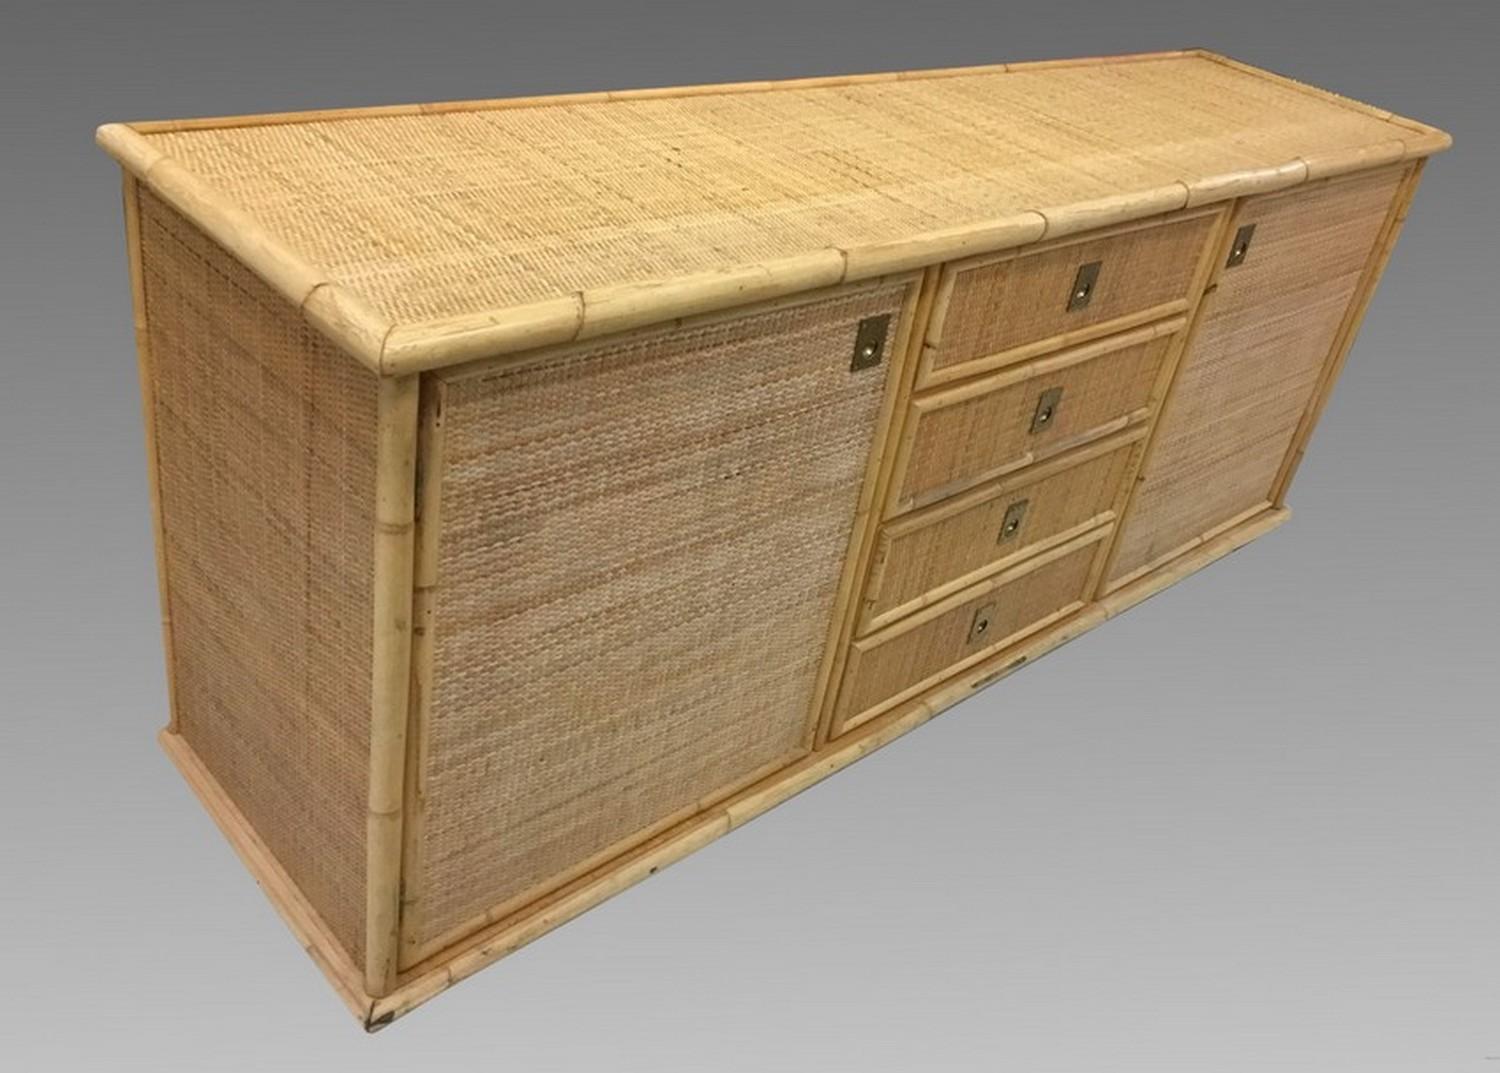 Large sideboard of bamboo and caning on a wooden structure, opening with two doors and four drawers. In excellent original condition.